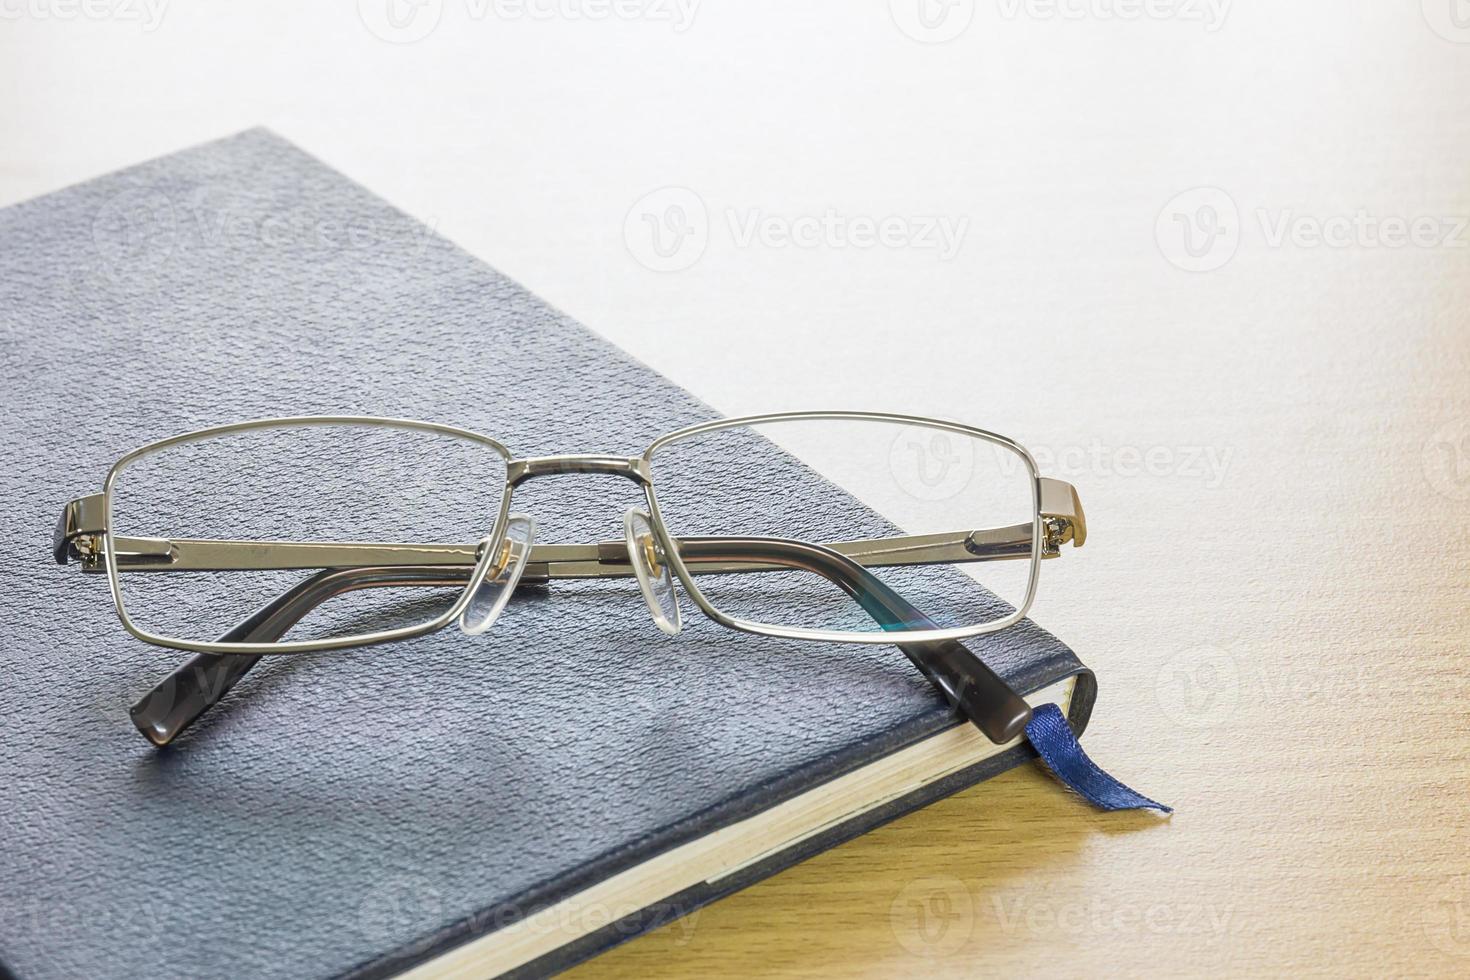 Glasses put on text book photo